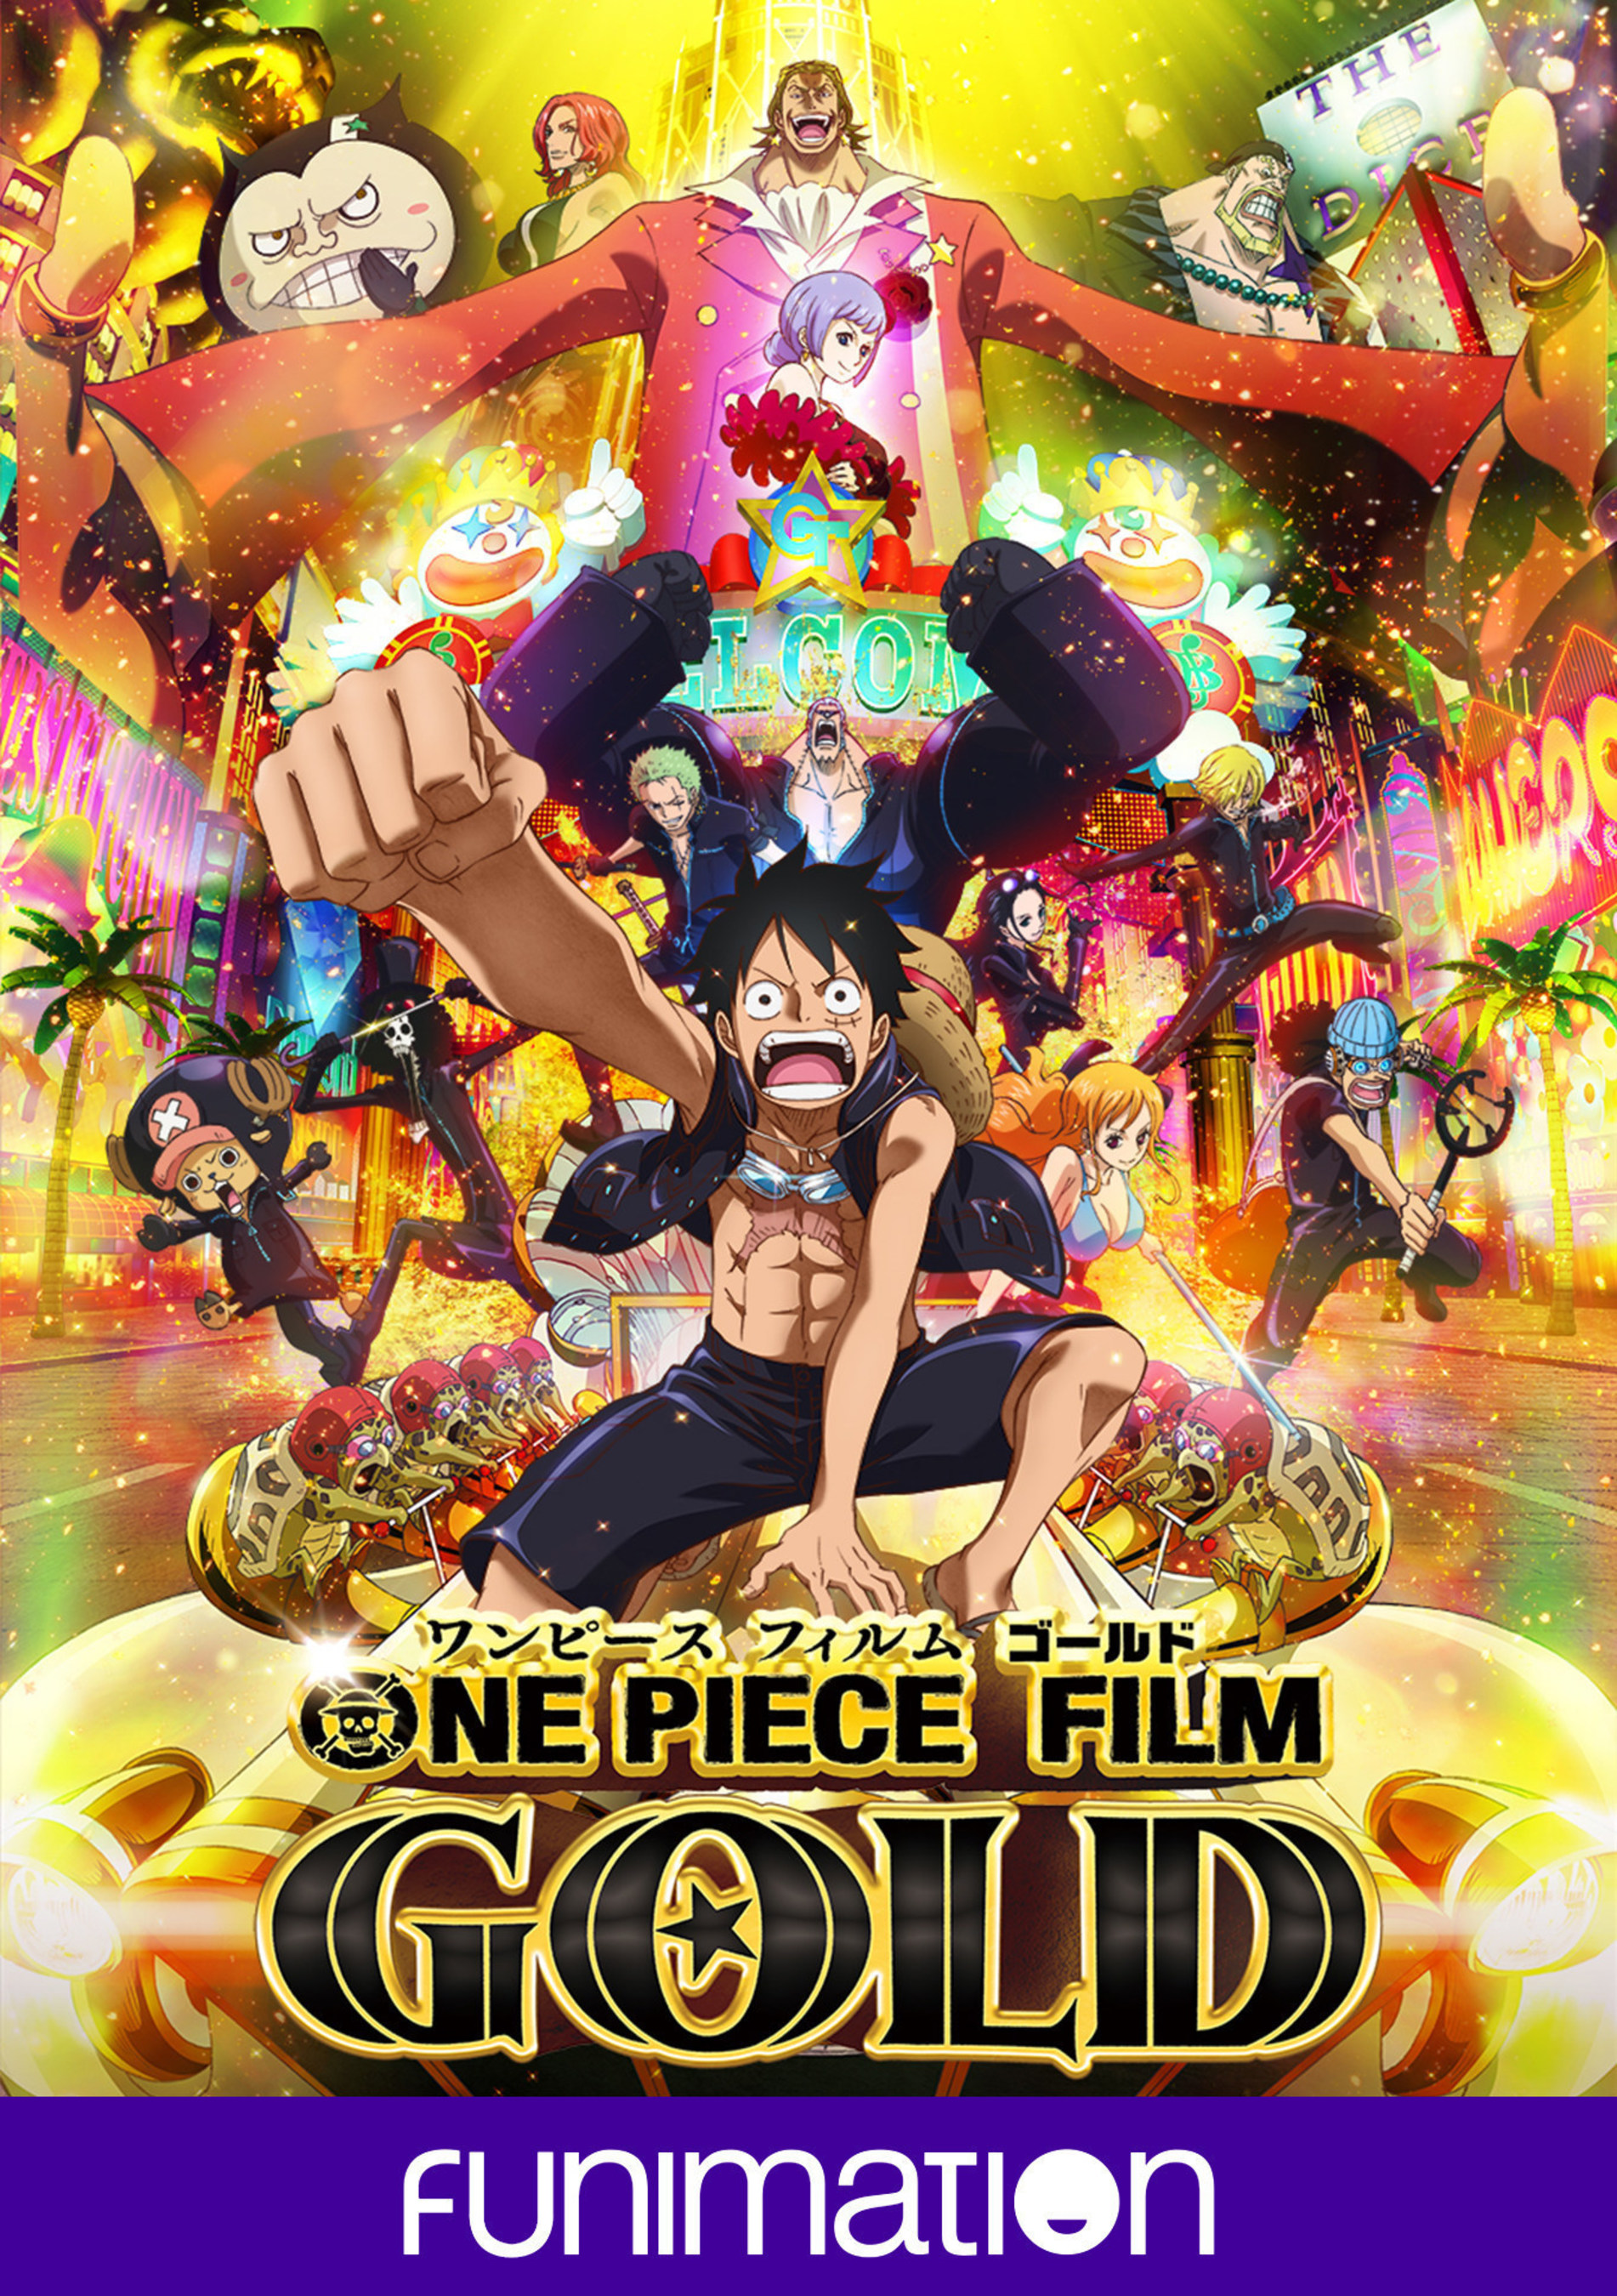 Bandai Namco US on X: RT @FUNimation: Want to win your own One Piece Film  Gold poster? Send us a picture of your ticket to the movie or your love of  One